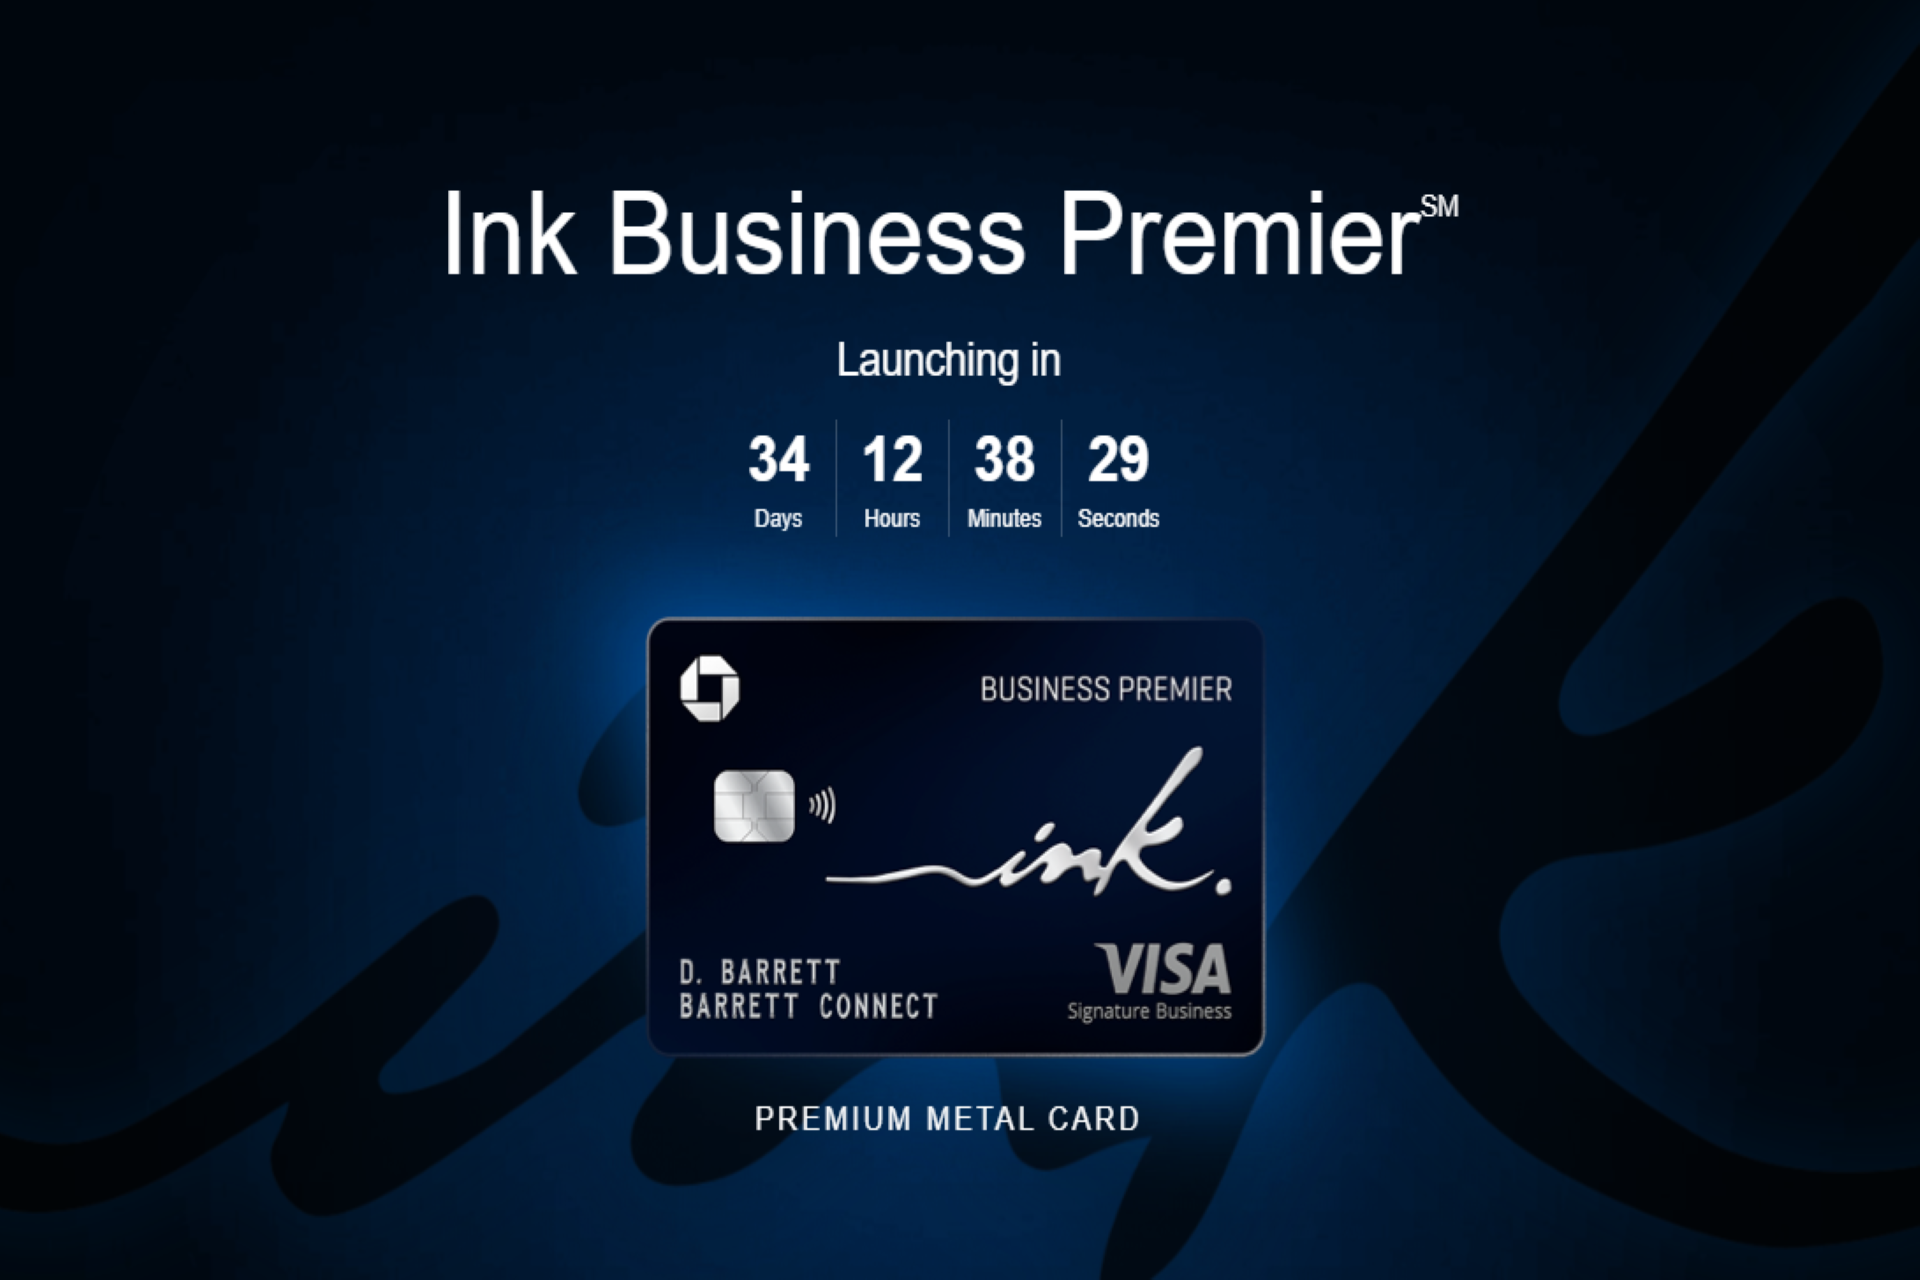 chase-launches-waitlist-for-new-ink-business-premier-card